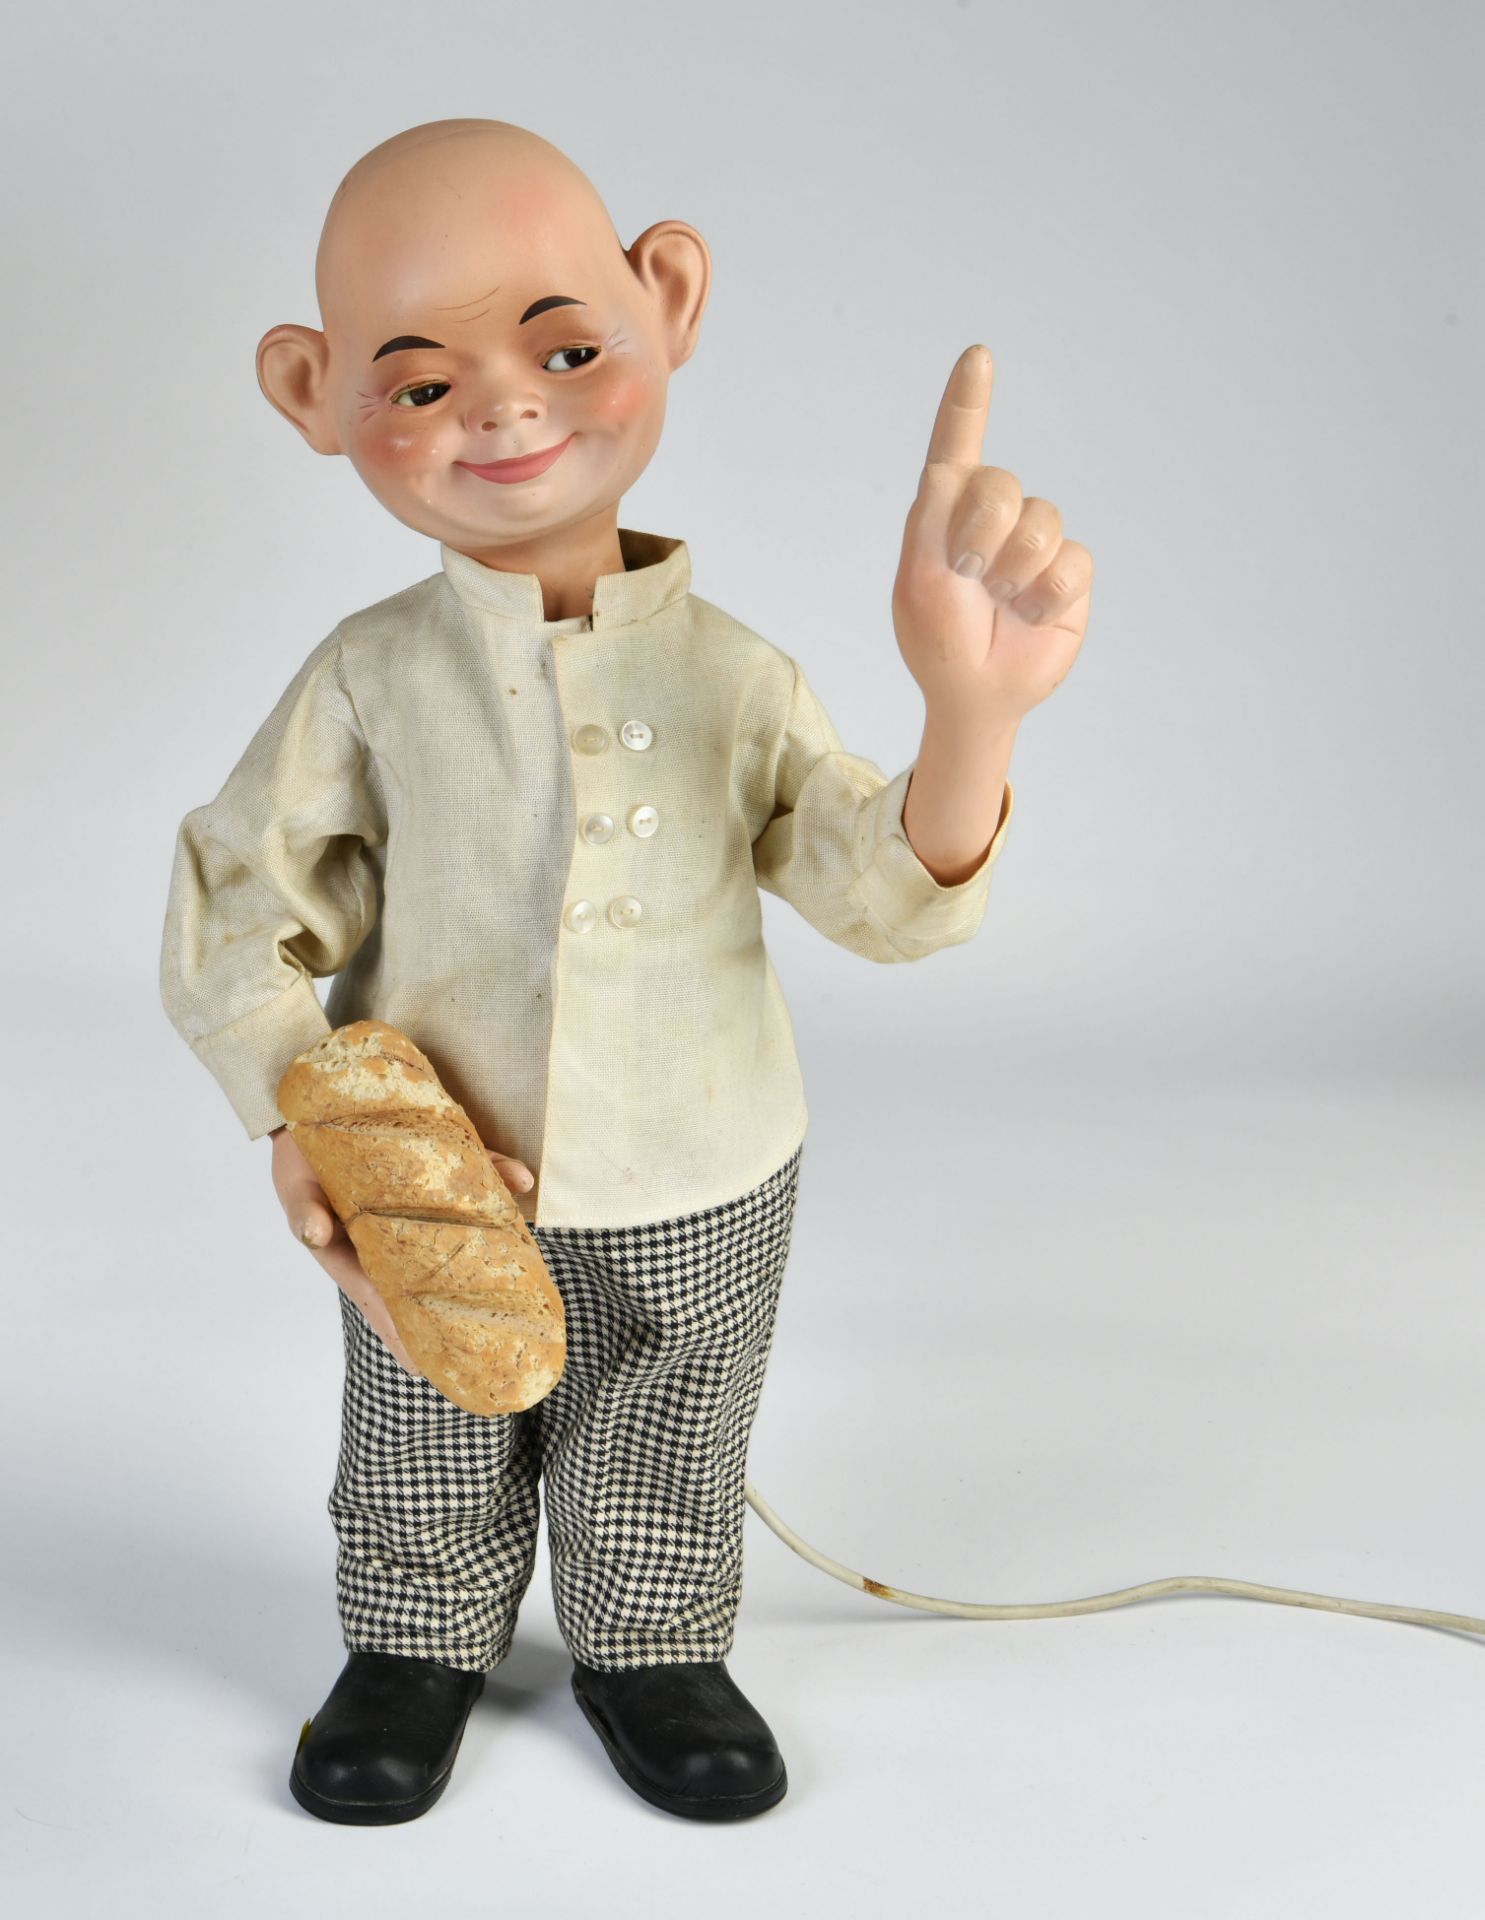 Advertising automaton "baker", bobblehead with limber eyes, 63 cm, electric drive ok, no shipping, Z